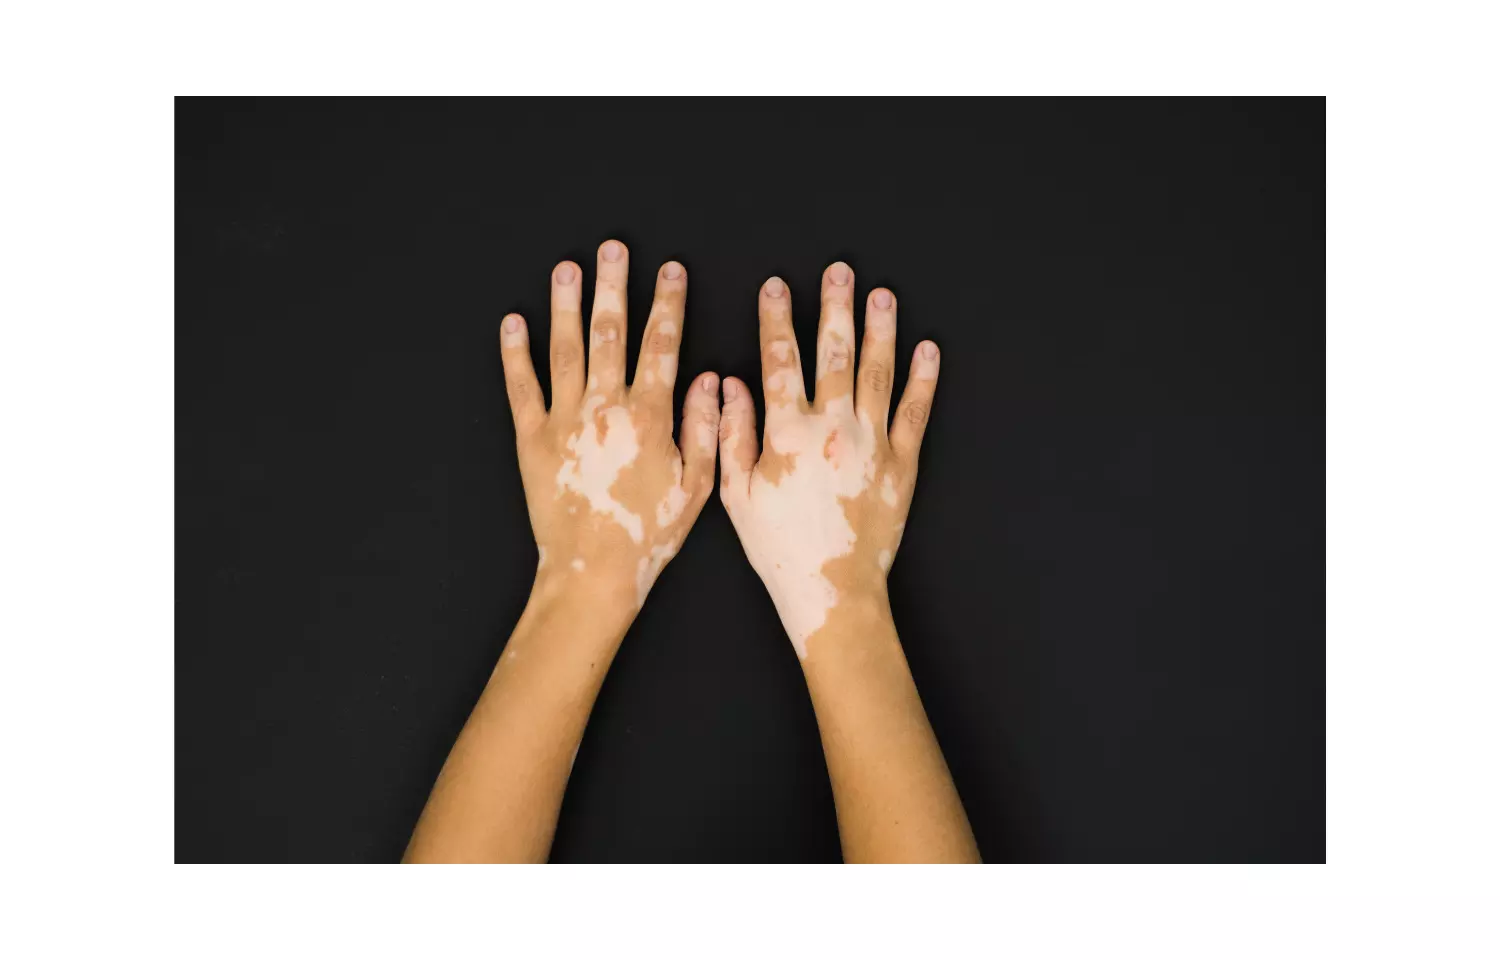 intralesional steroid injection with UV light effective option for treating vitiligo: Study